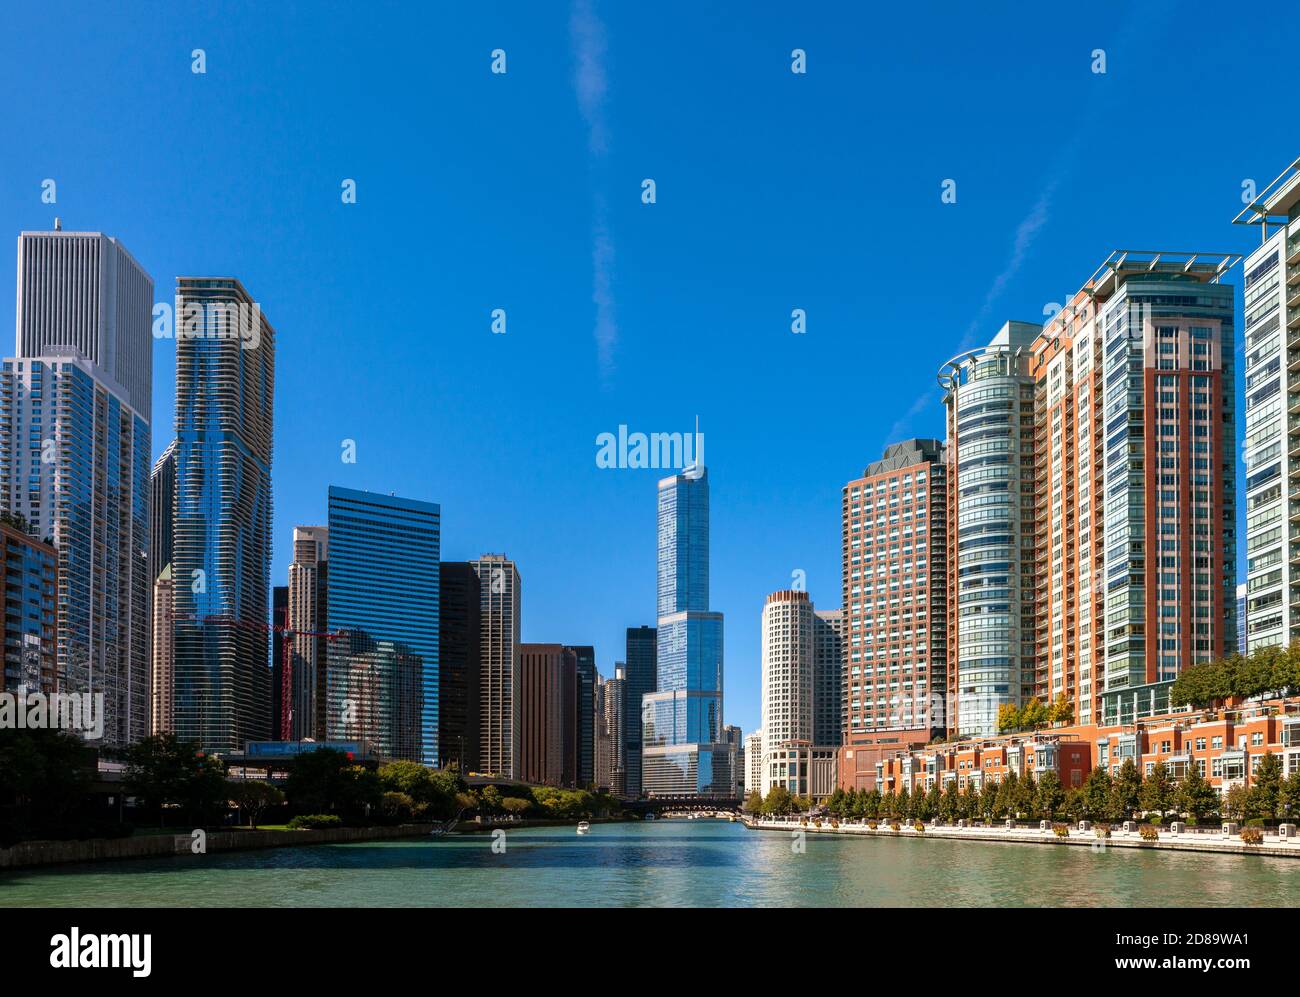 Chicago, third largest city in the United States. The building at the center is Trump Tower, which contains condominiums and a hotel. Stock Photo